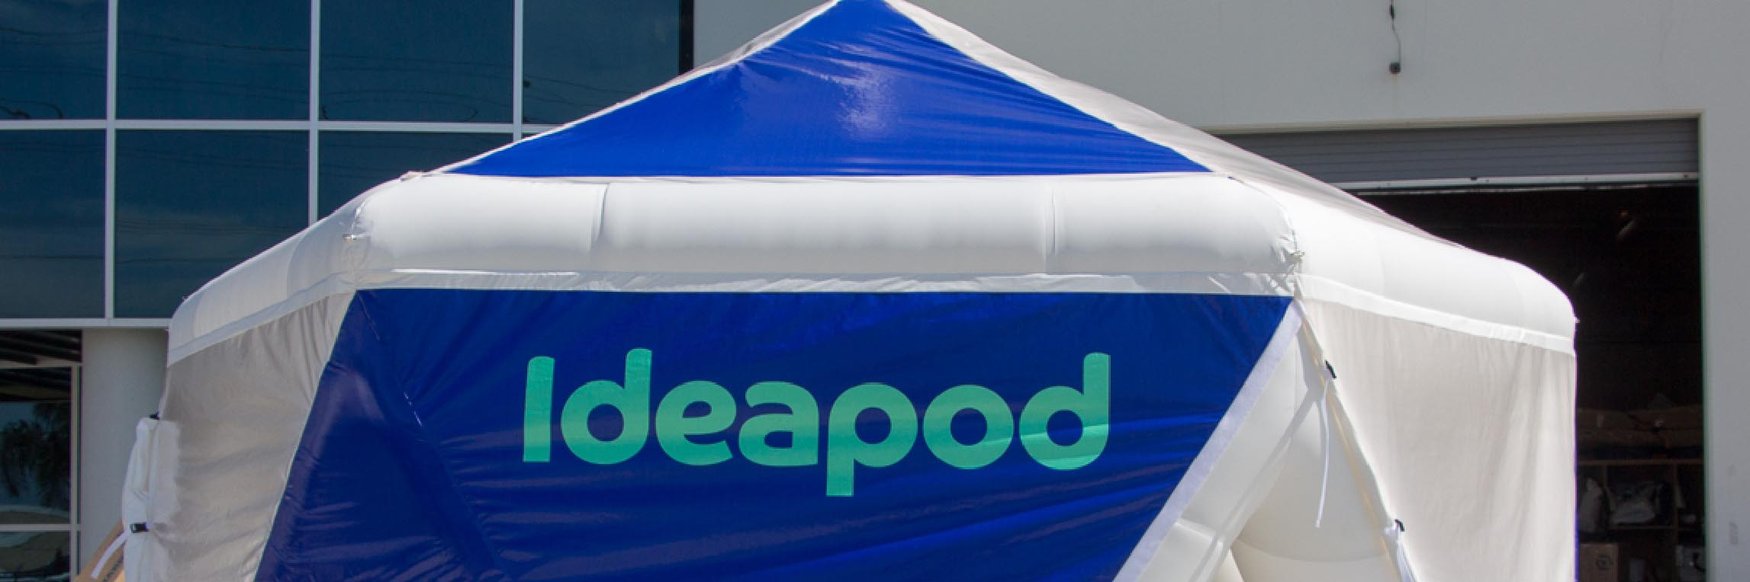 Ideapod-logo-on-an-inflatable-tent.jpg